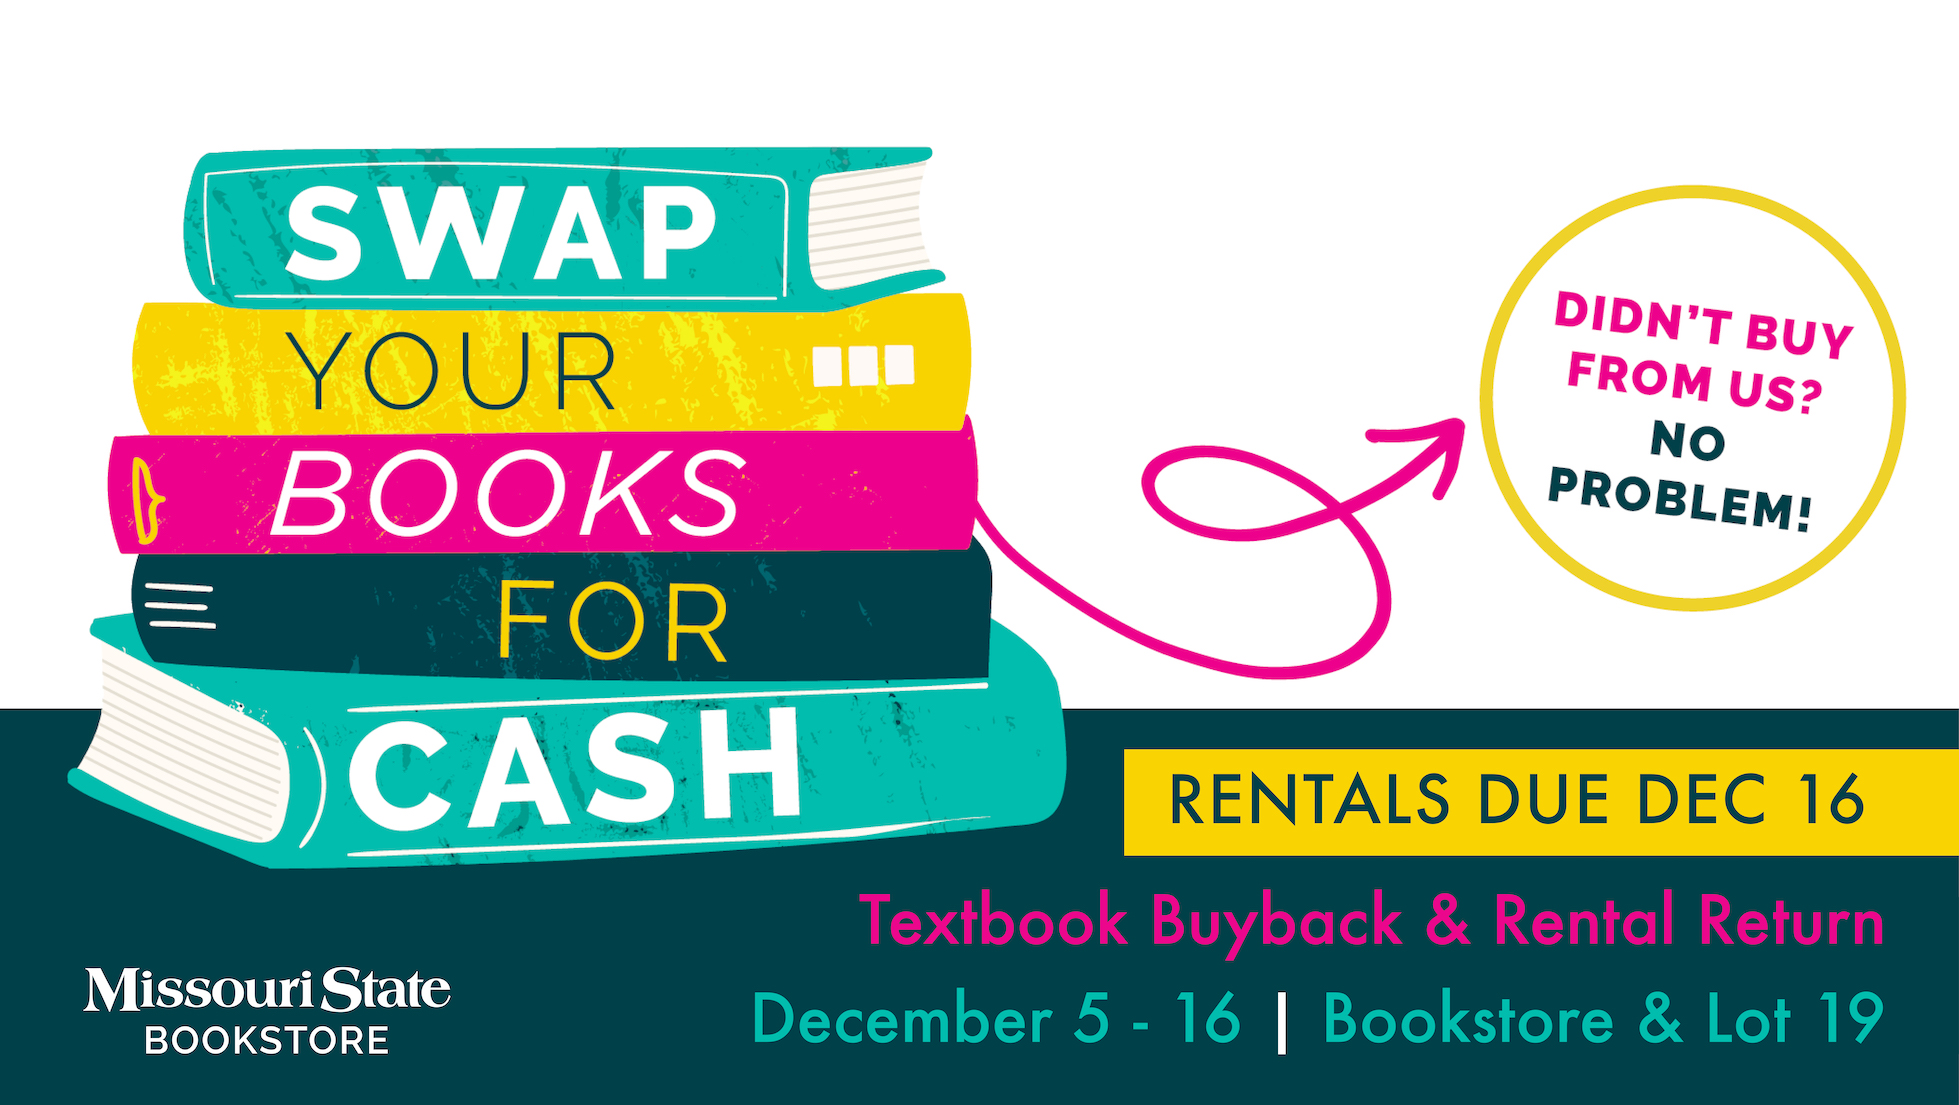 Swap your Textbooks for Cash at the Bookstore through December 1st!